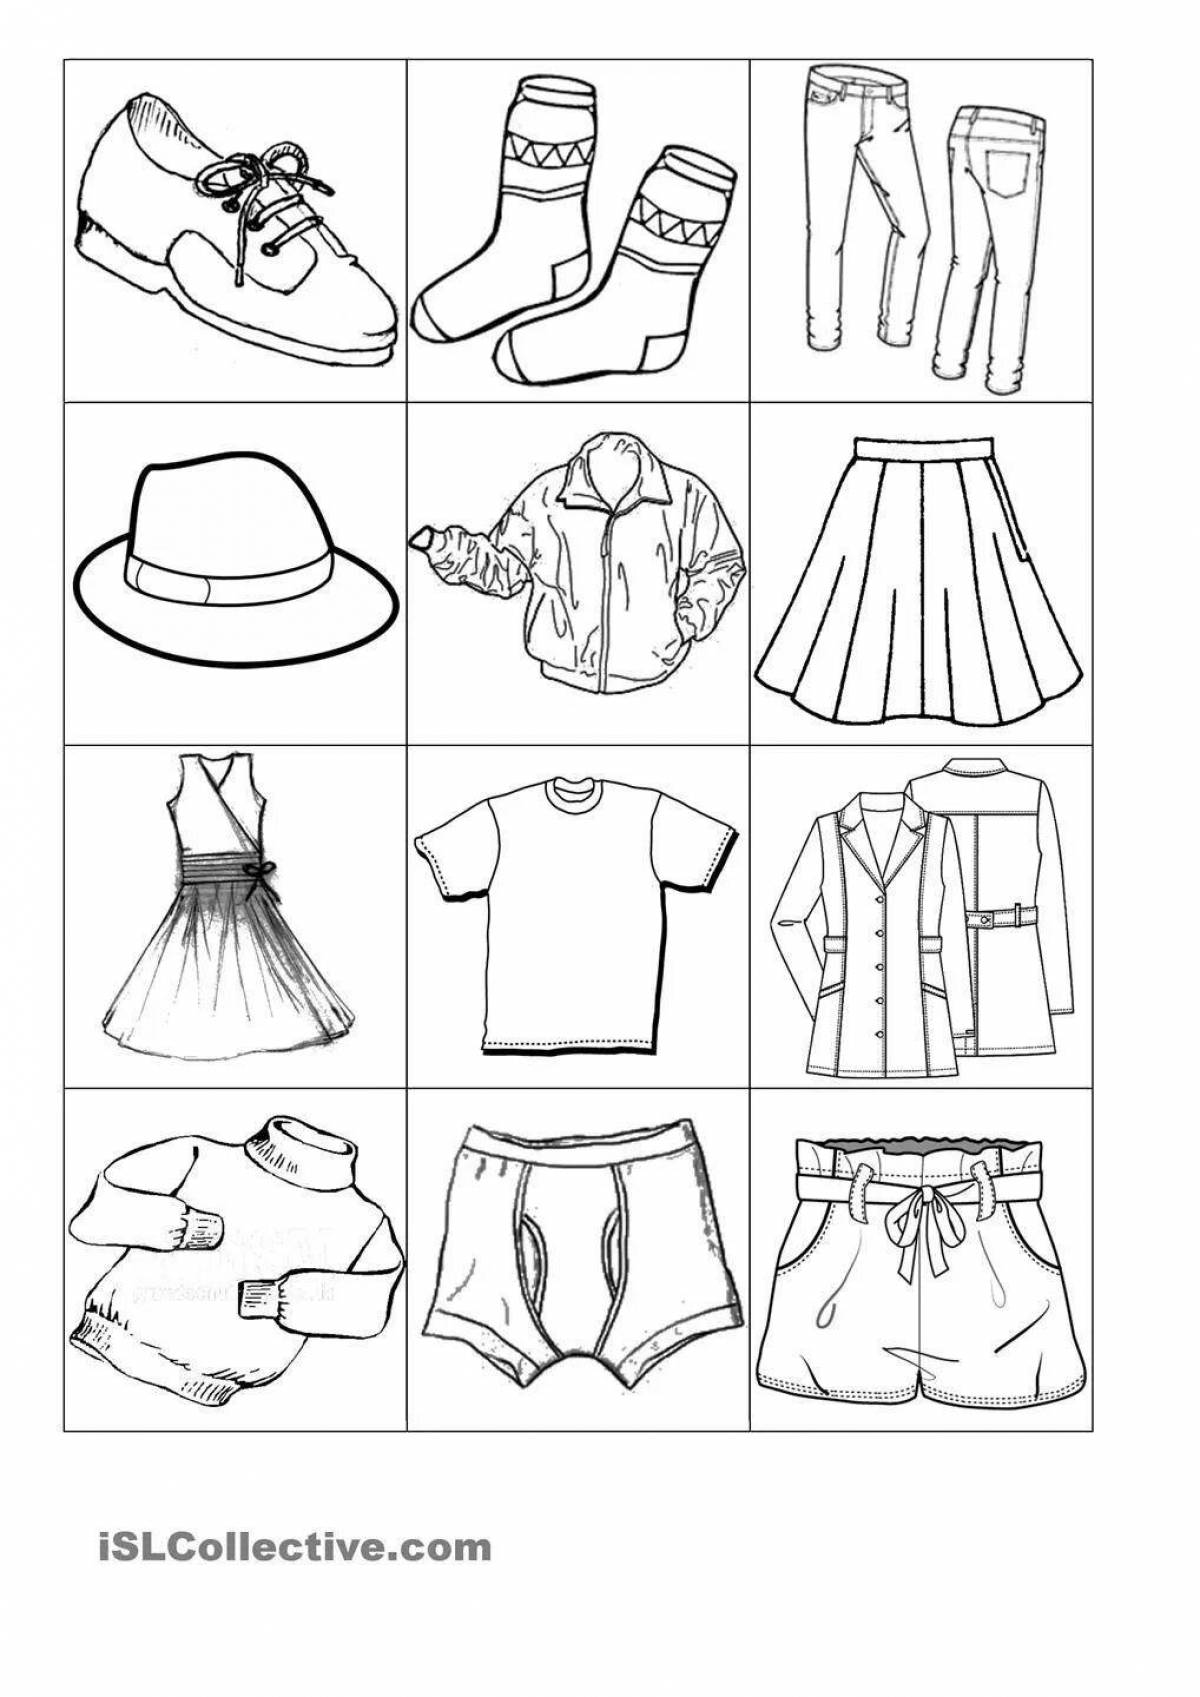 Coloring book fun summer clothes for kids